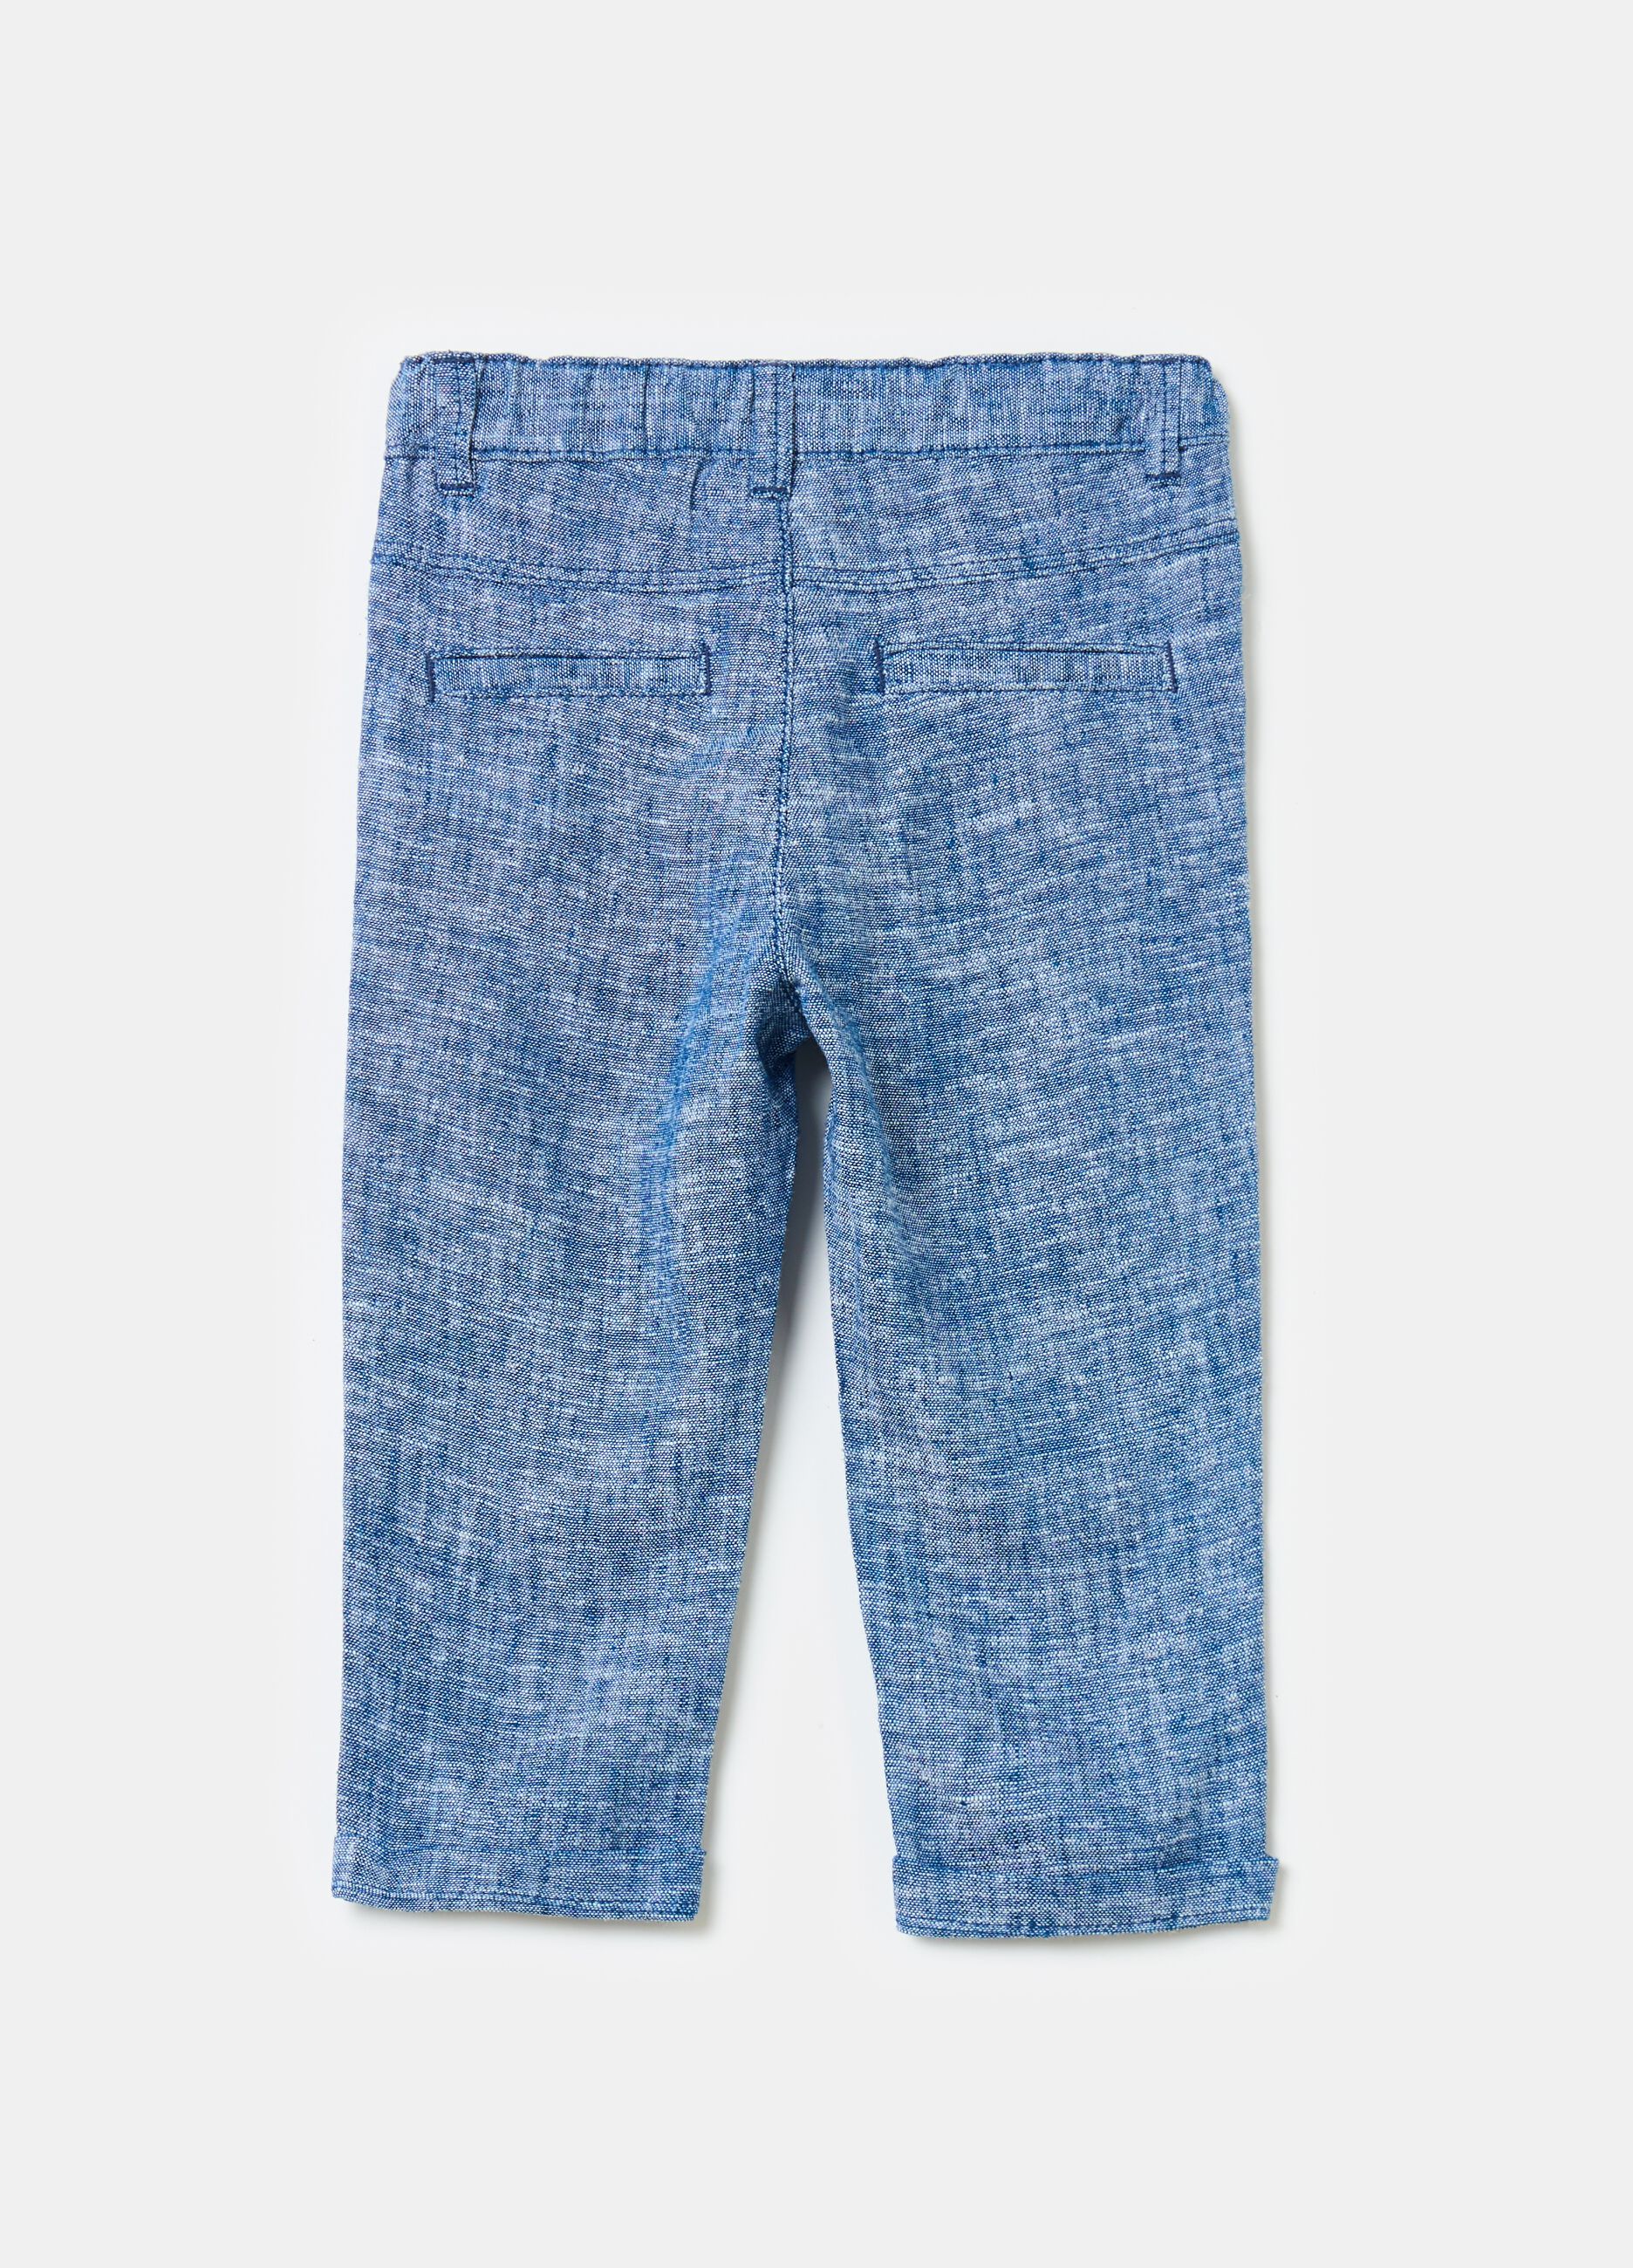 Viscose and linen chambray trousers